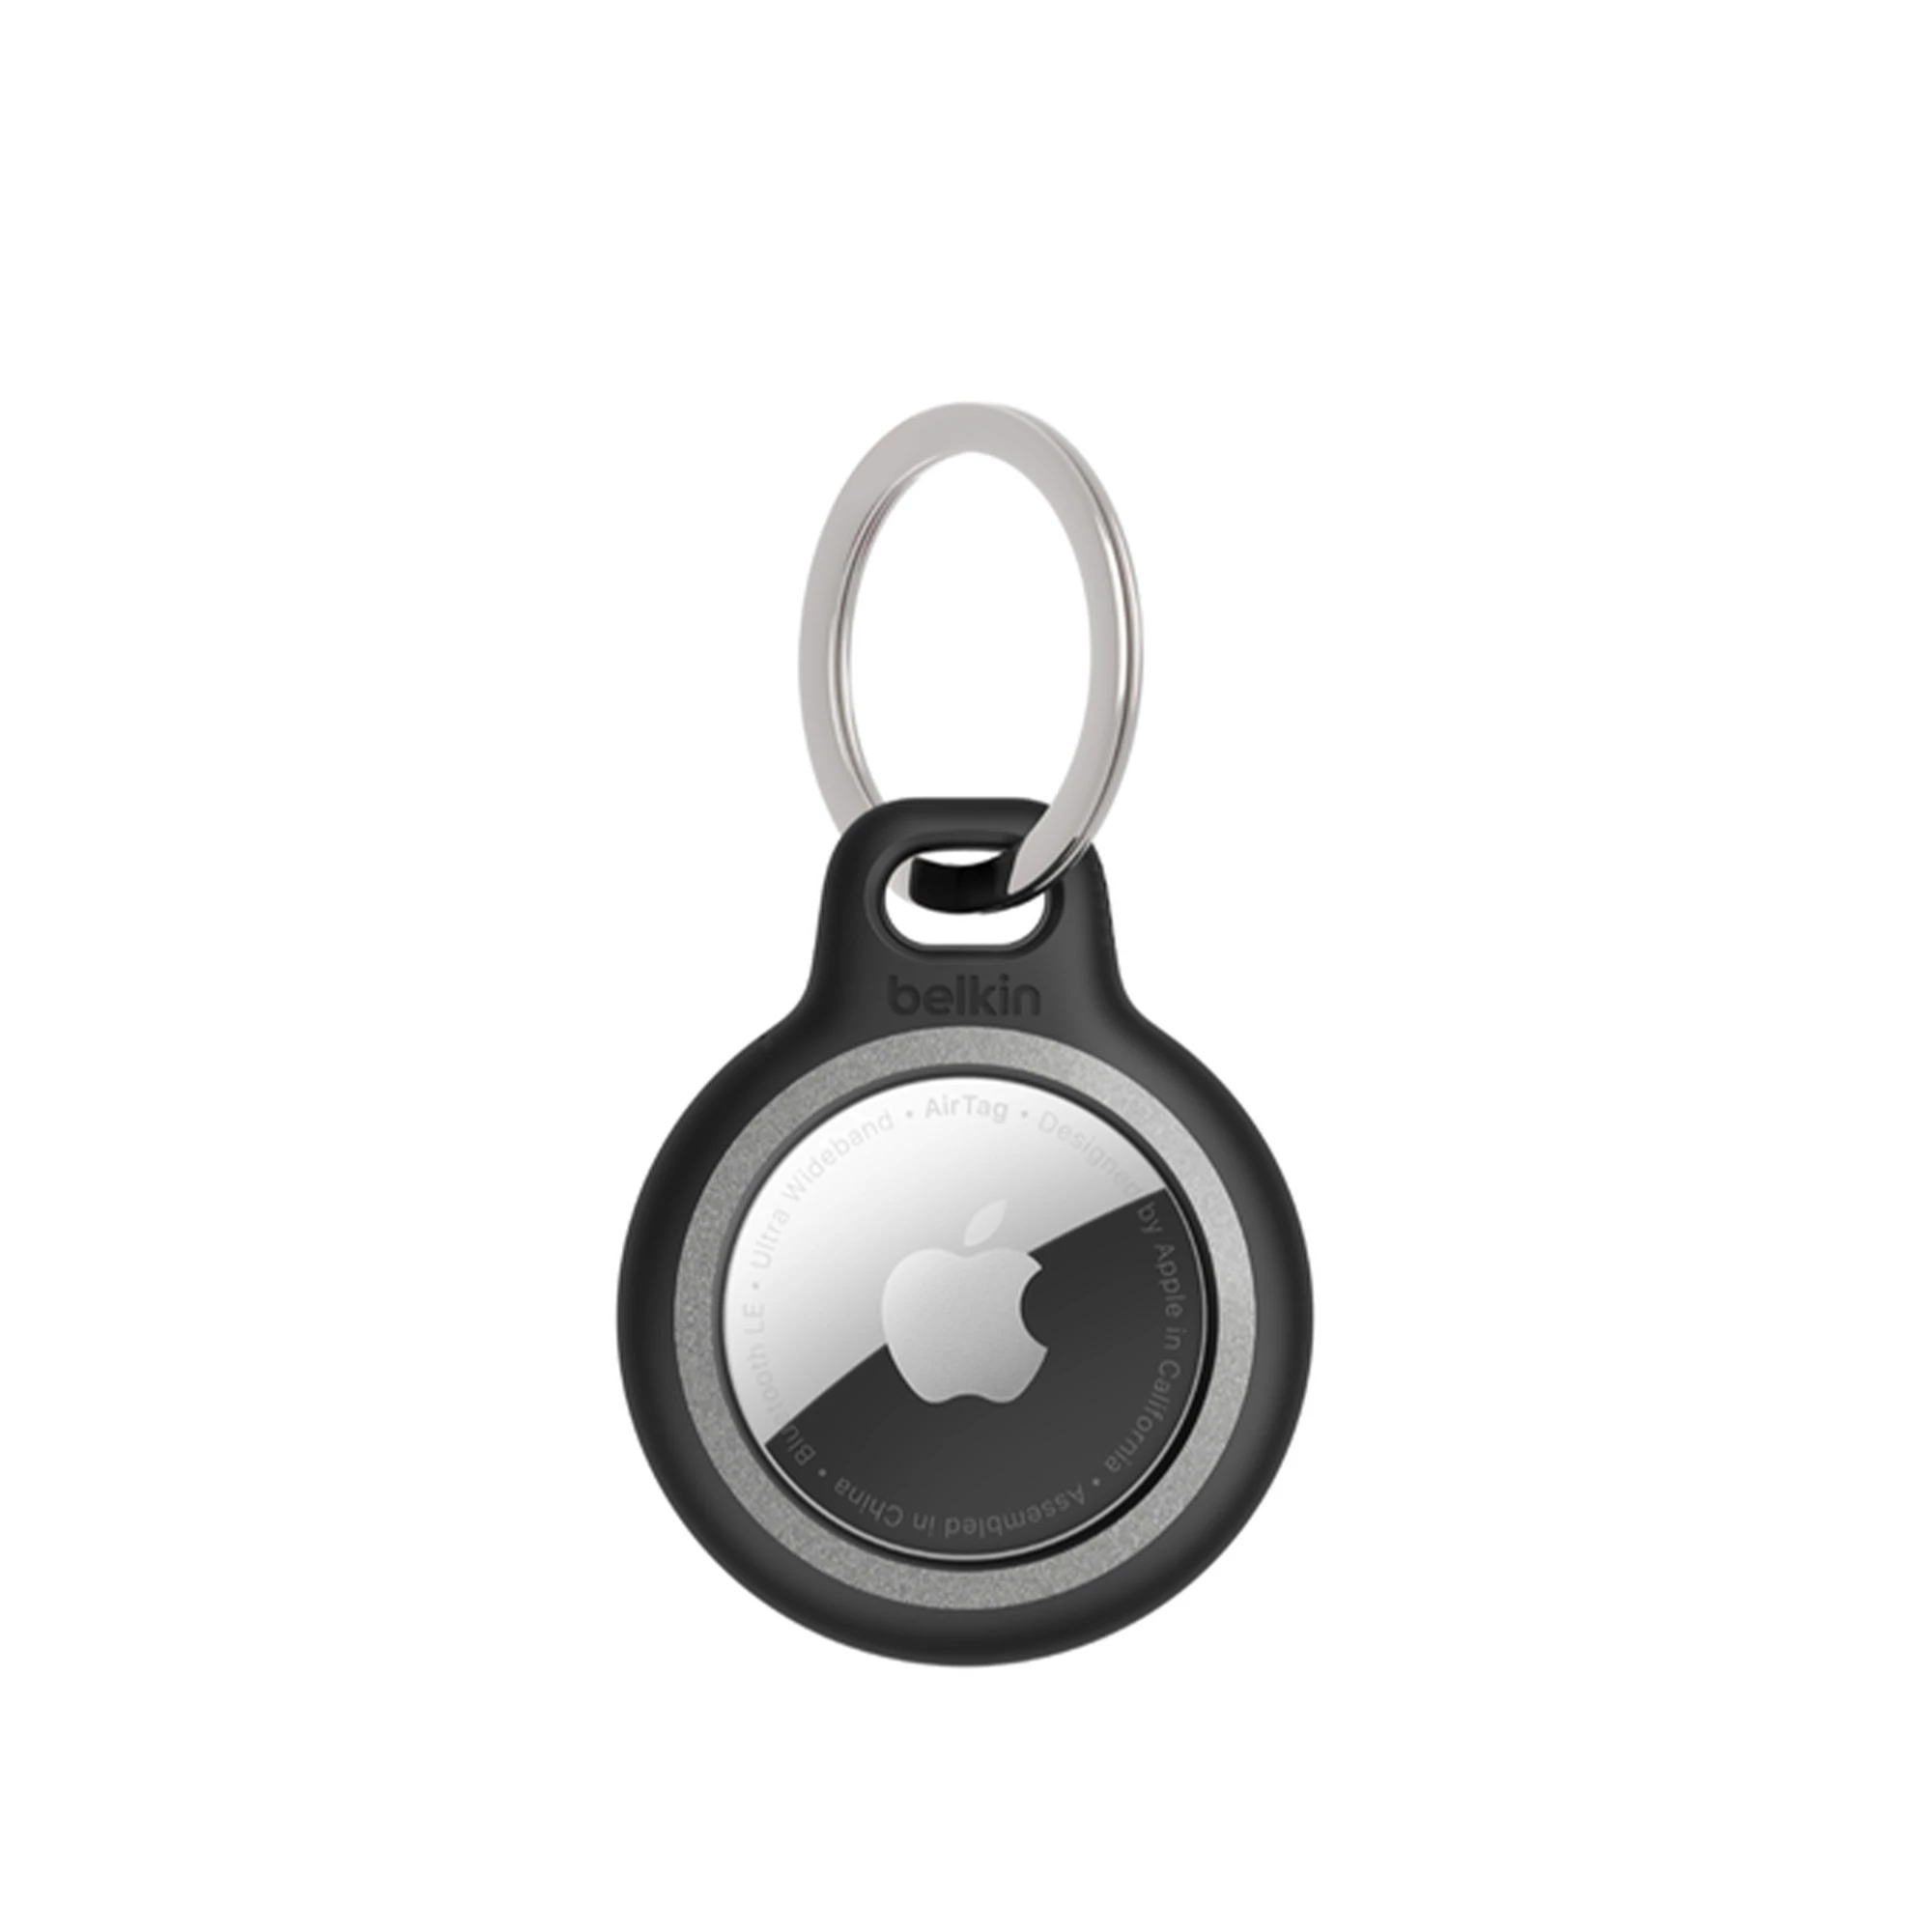 Belkin Reflective Secure Holder with Key Ring for AirTag 1 шт - Dark Grey (MSC011dsGS)